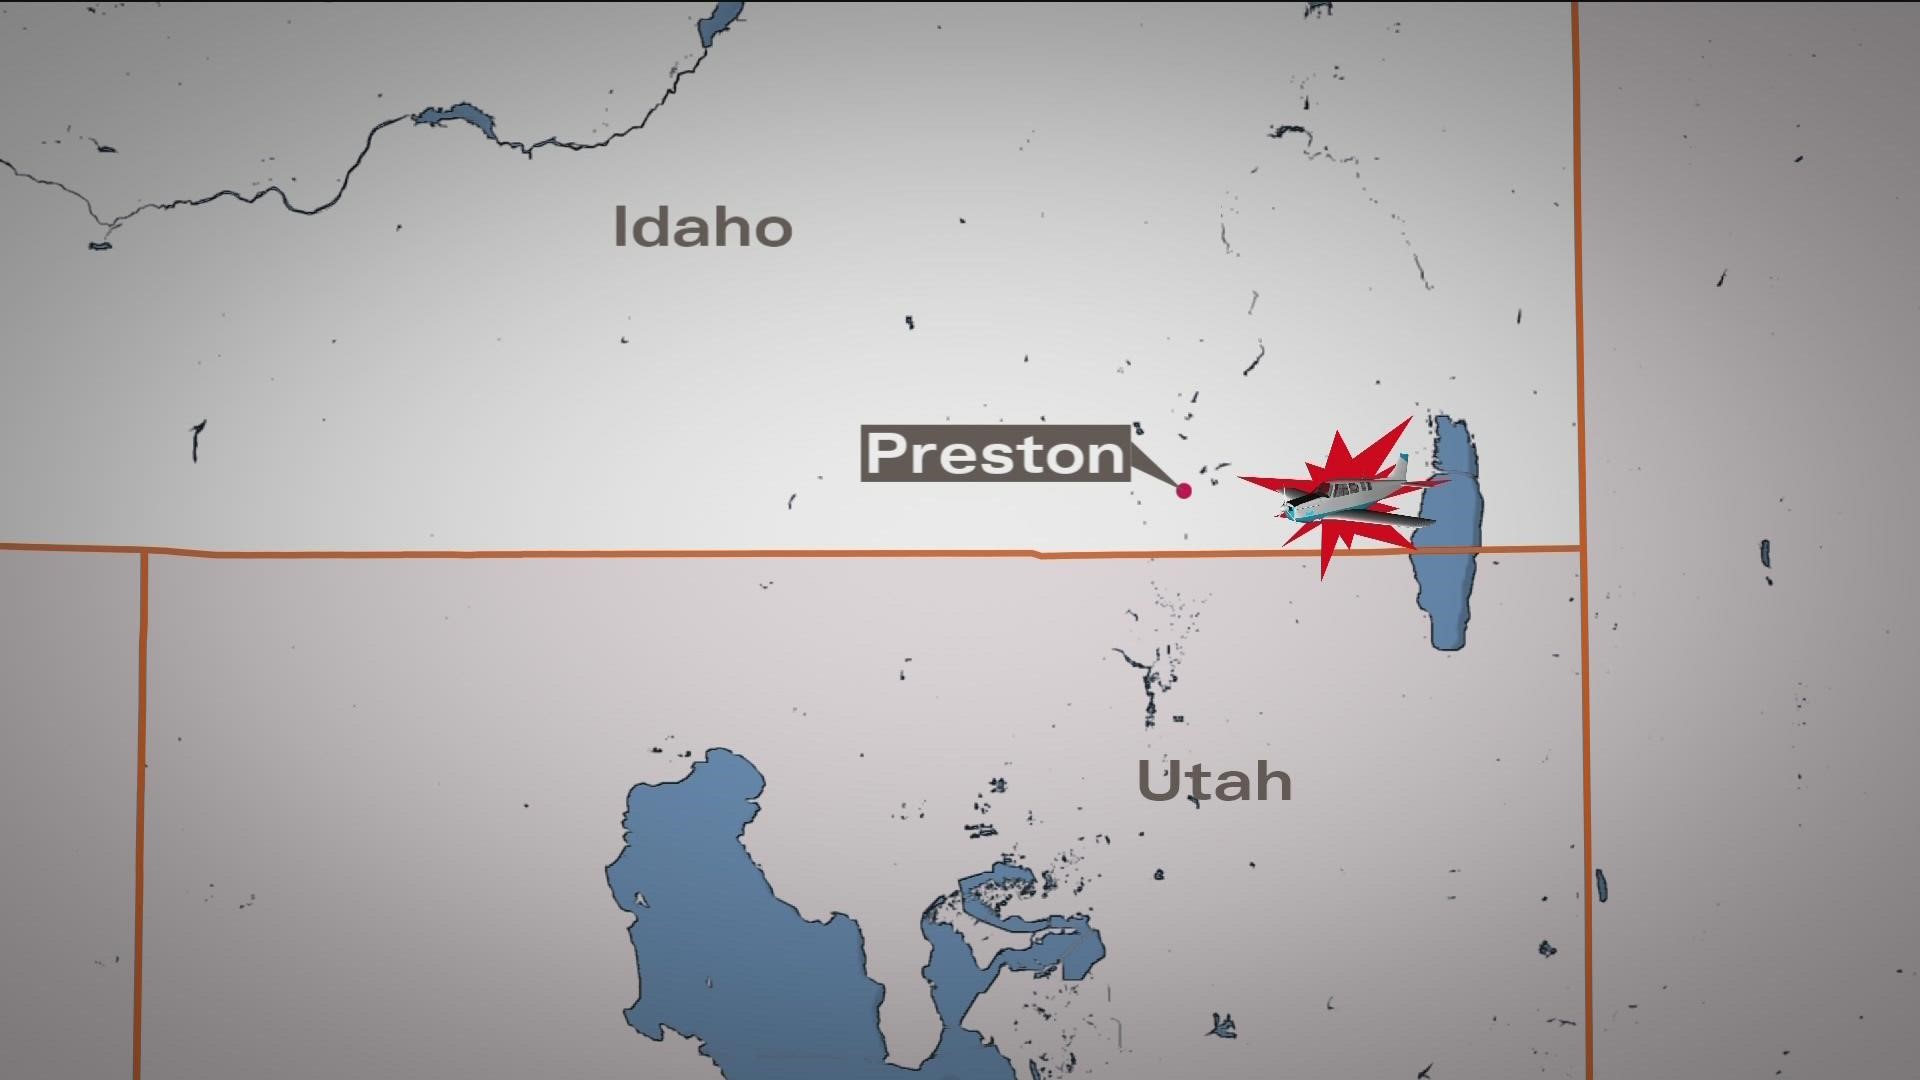 The husband and wife were flying from Boise to Rock Springs, Wyo., at the time of the crash Wednesday, according to the Franklin County Sheriff's Office.